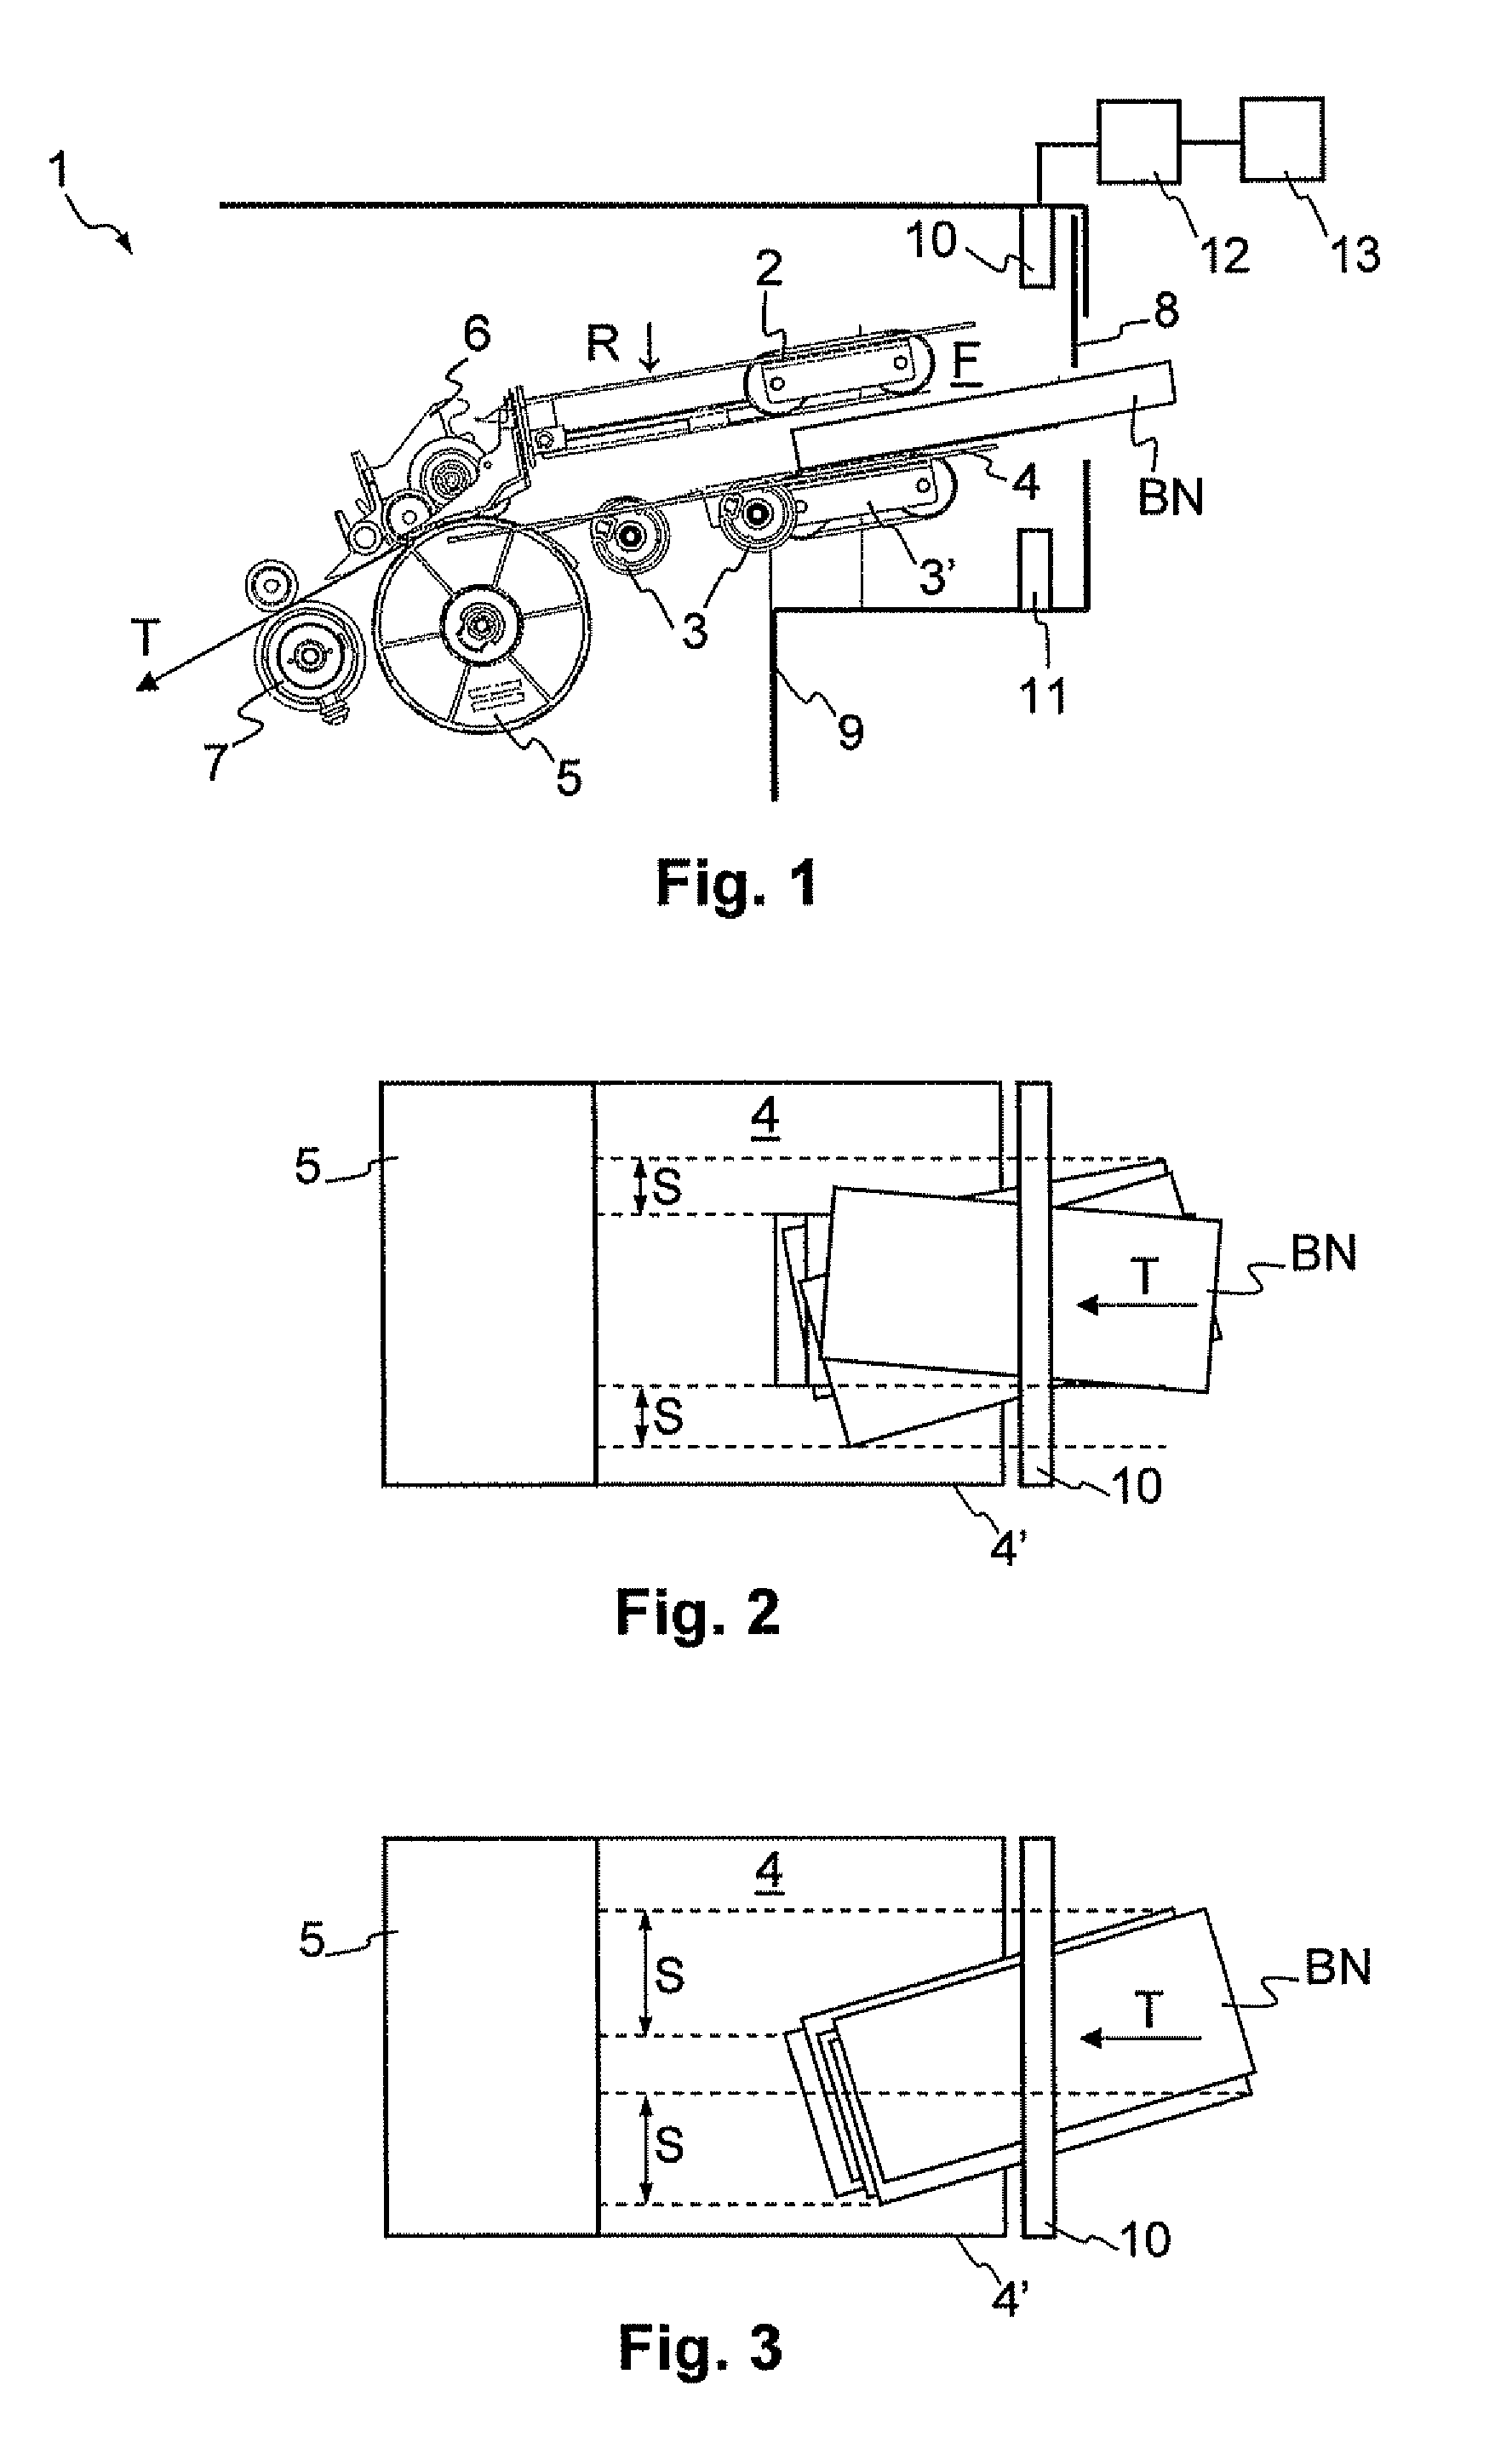 Apparatus for singling of sheet material